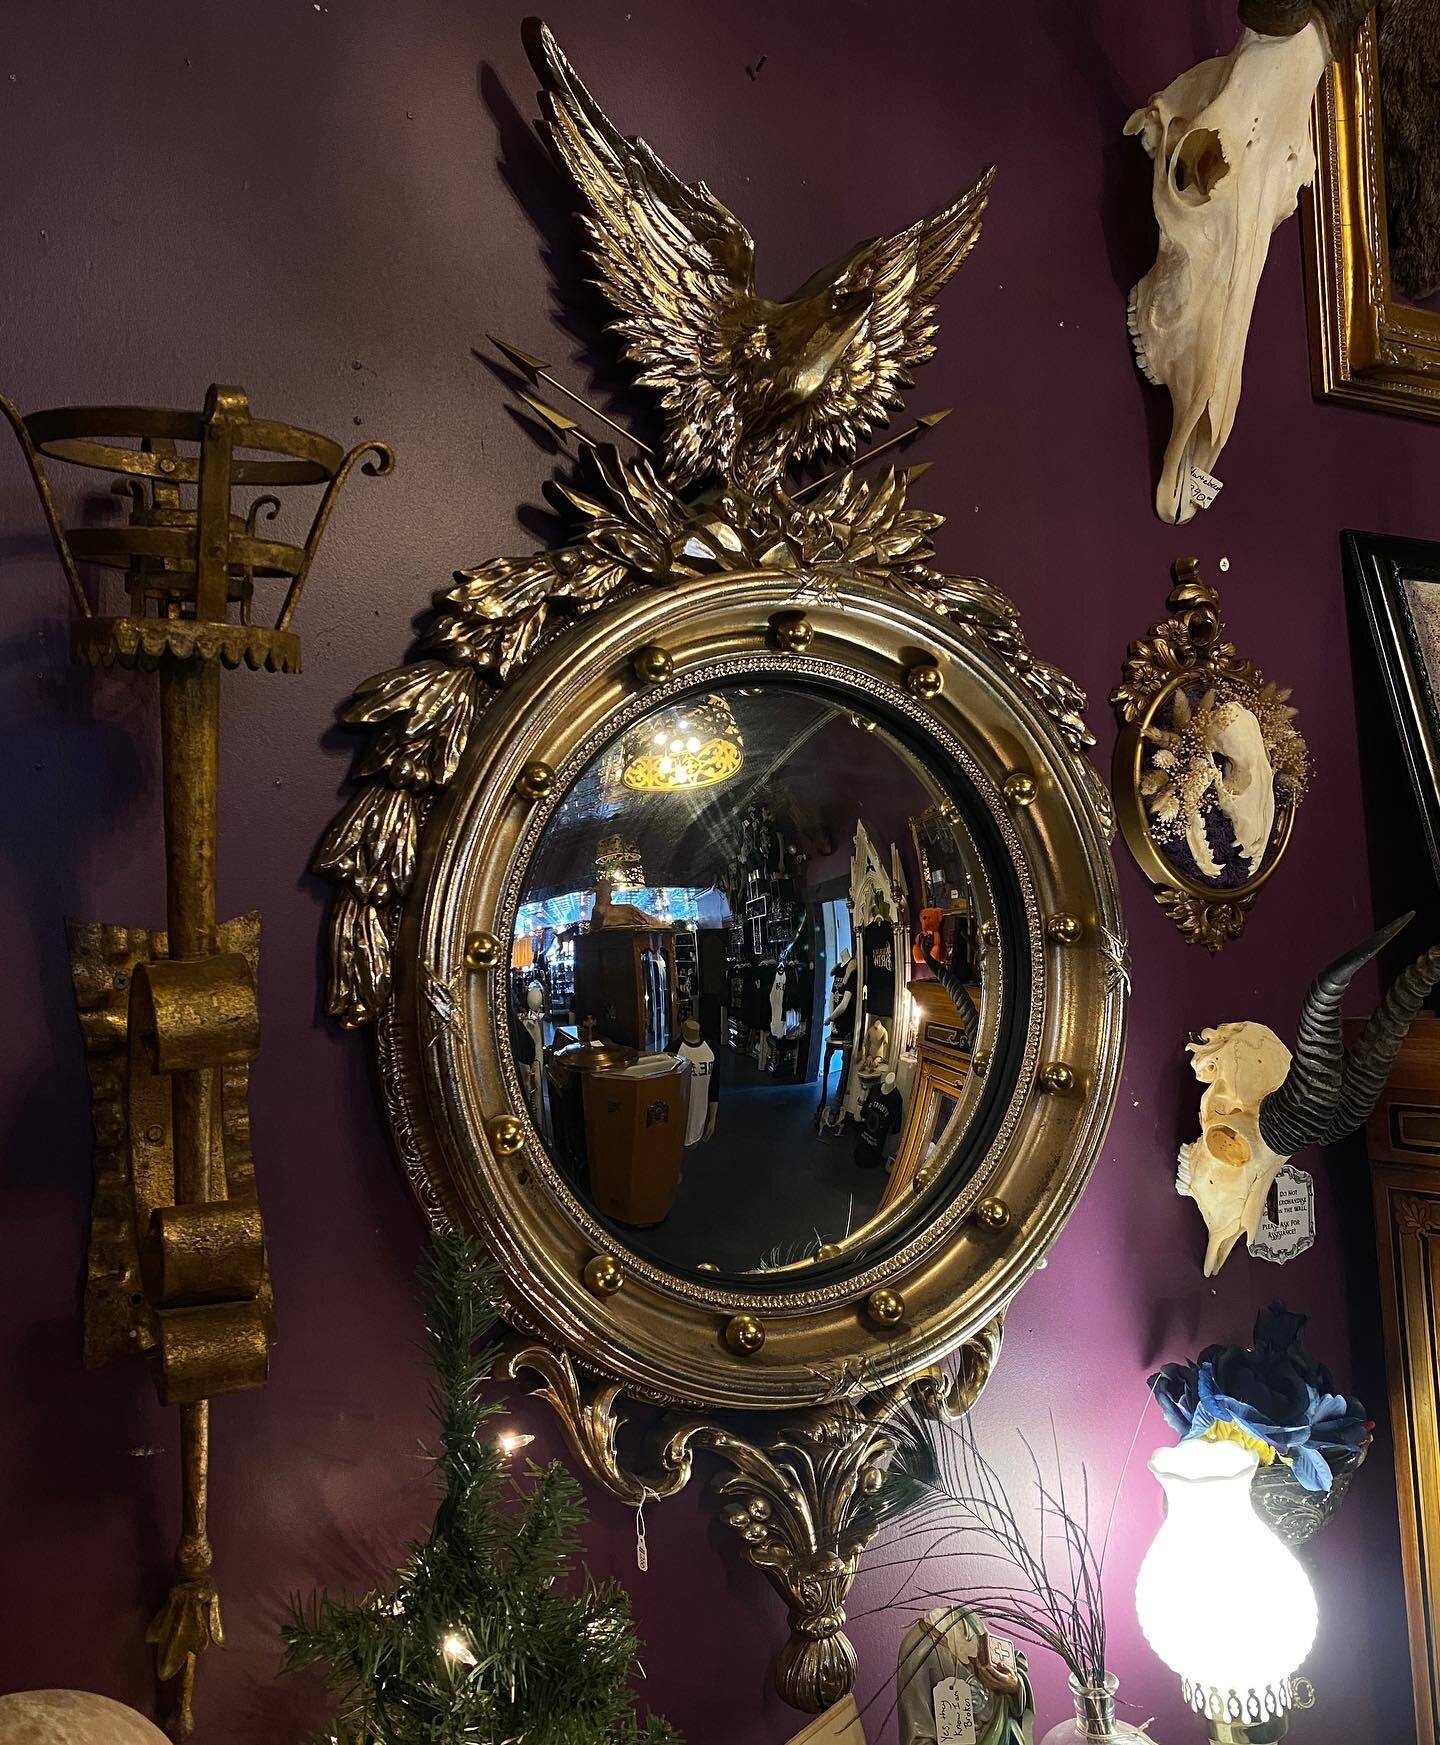 Federal Regency Eagle Porthole Convex Mirror 🦅🪞 Available in-store! Here today until 6pm✨
.
.
.
.
#strange #unusual #thestrangeandunusual #oddities #oddity #mirror #ornatemirror #antiquemirror #convexmirror #antique #antiques #mirrors